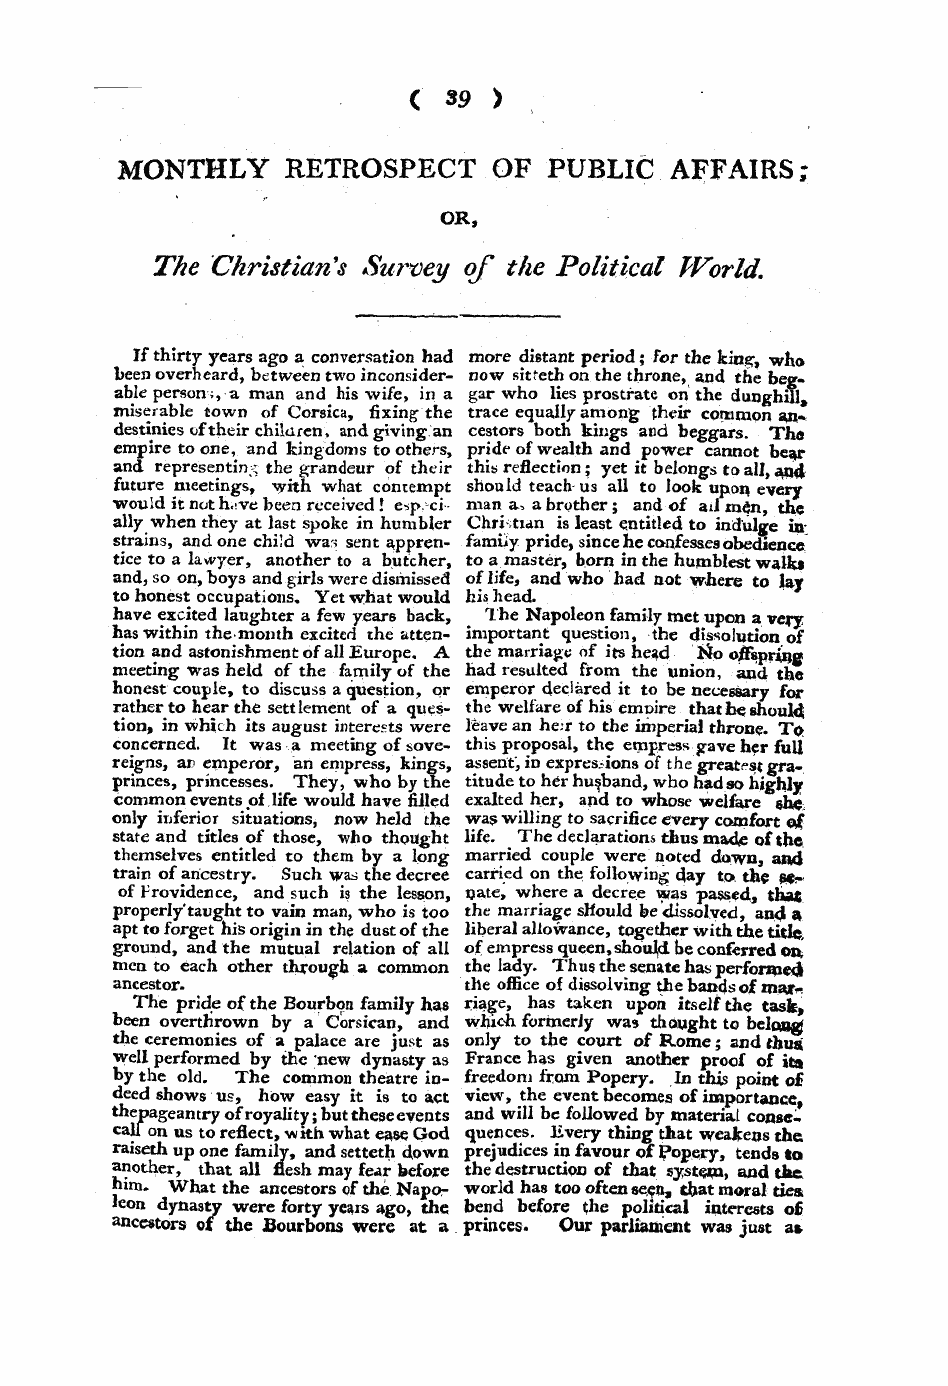 Monthly Repository (1806-1838) and Unitarian Chronicle (1832-1833): F Y, 1st edition - Monthly Retrospect Of Public Affairs; Or, The Christian's Survey Of The Political World.